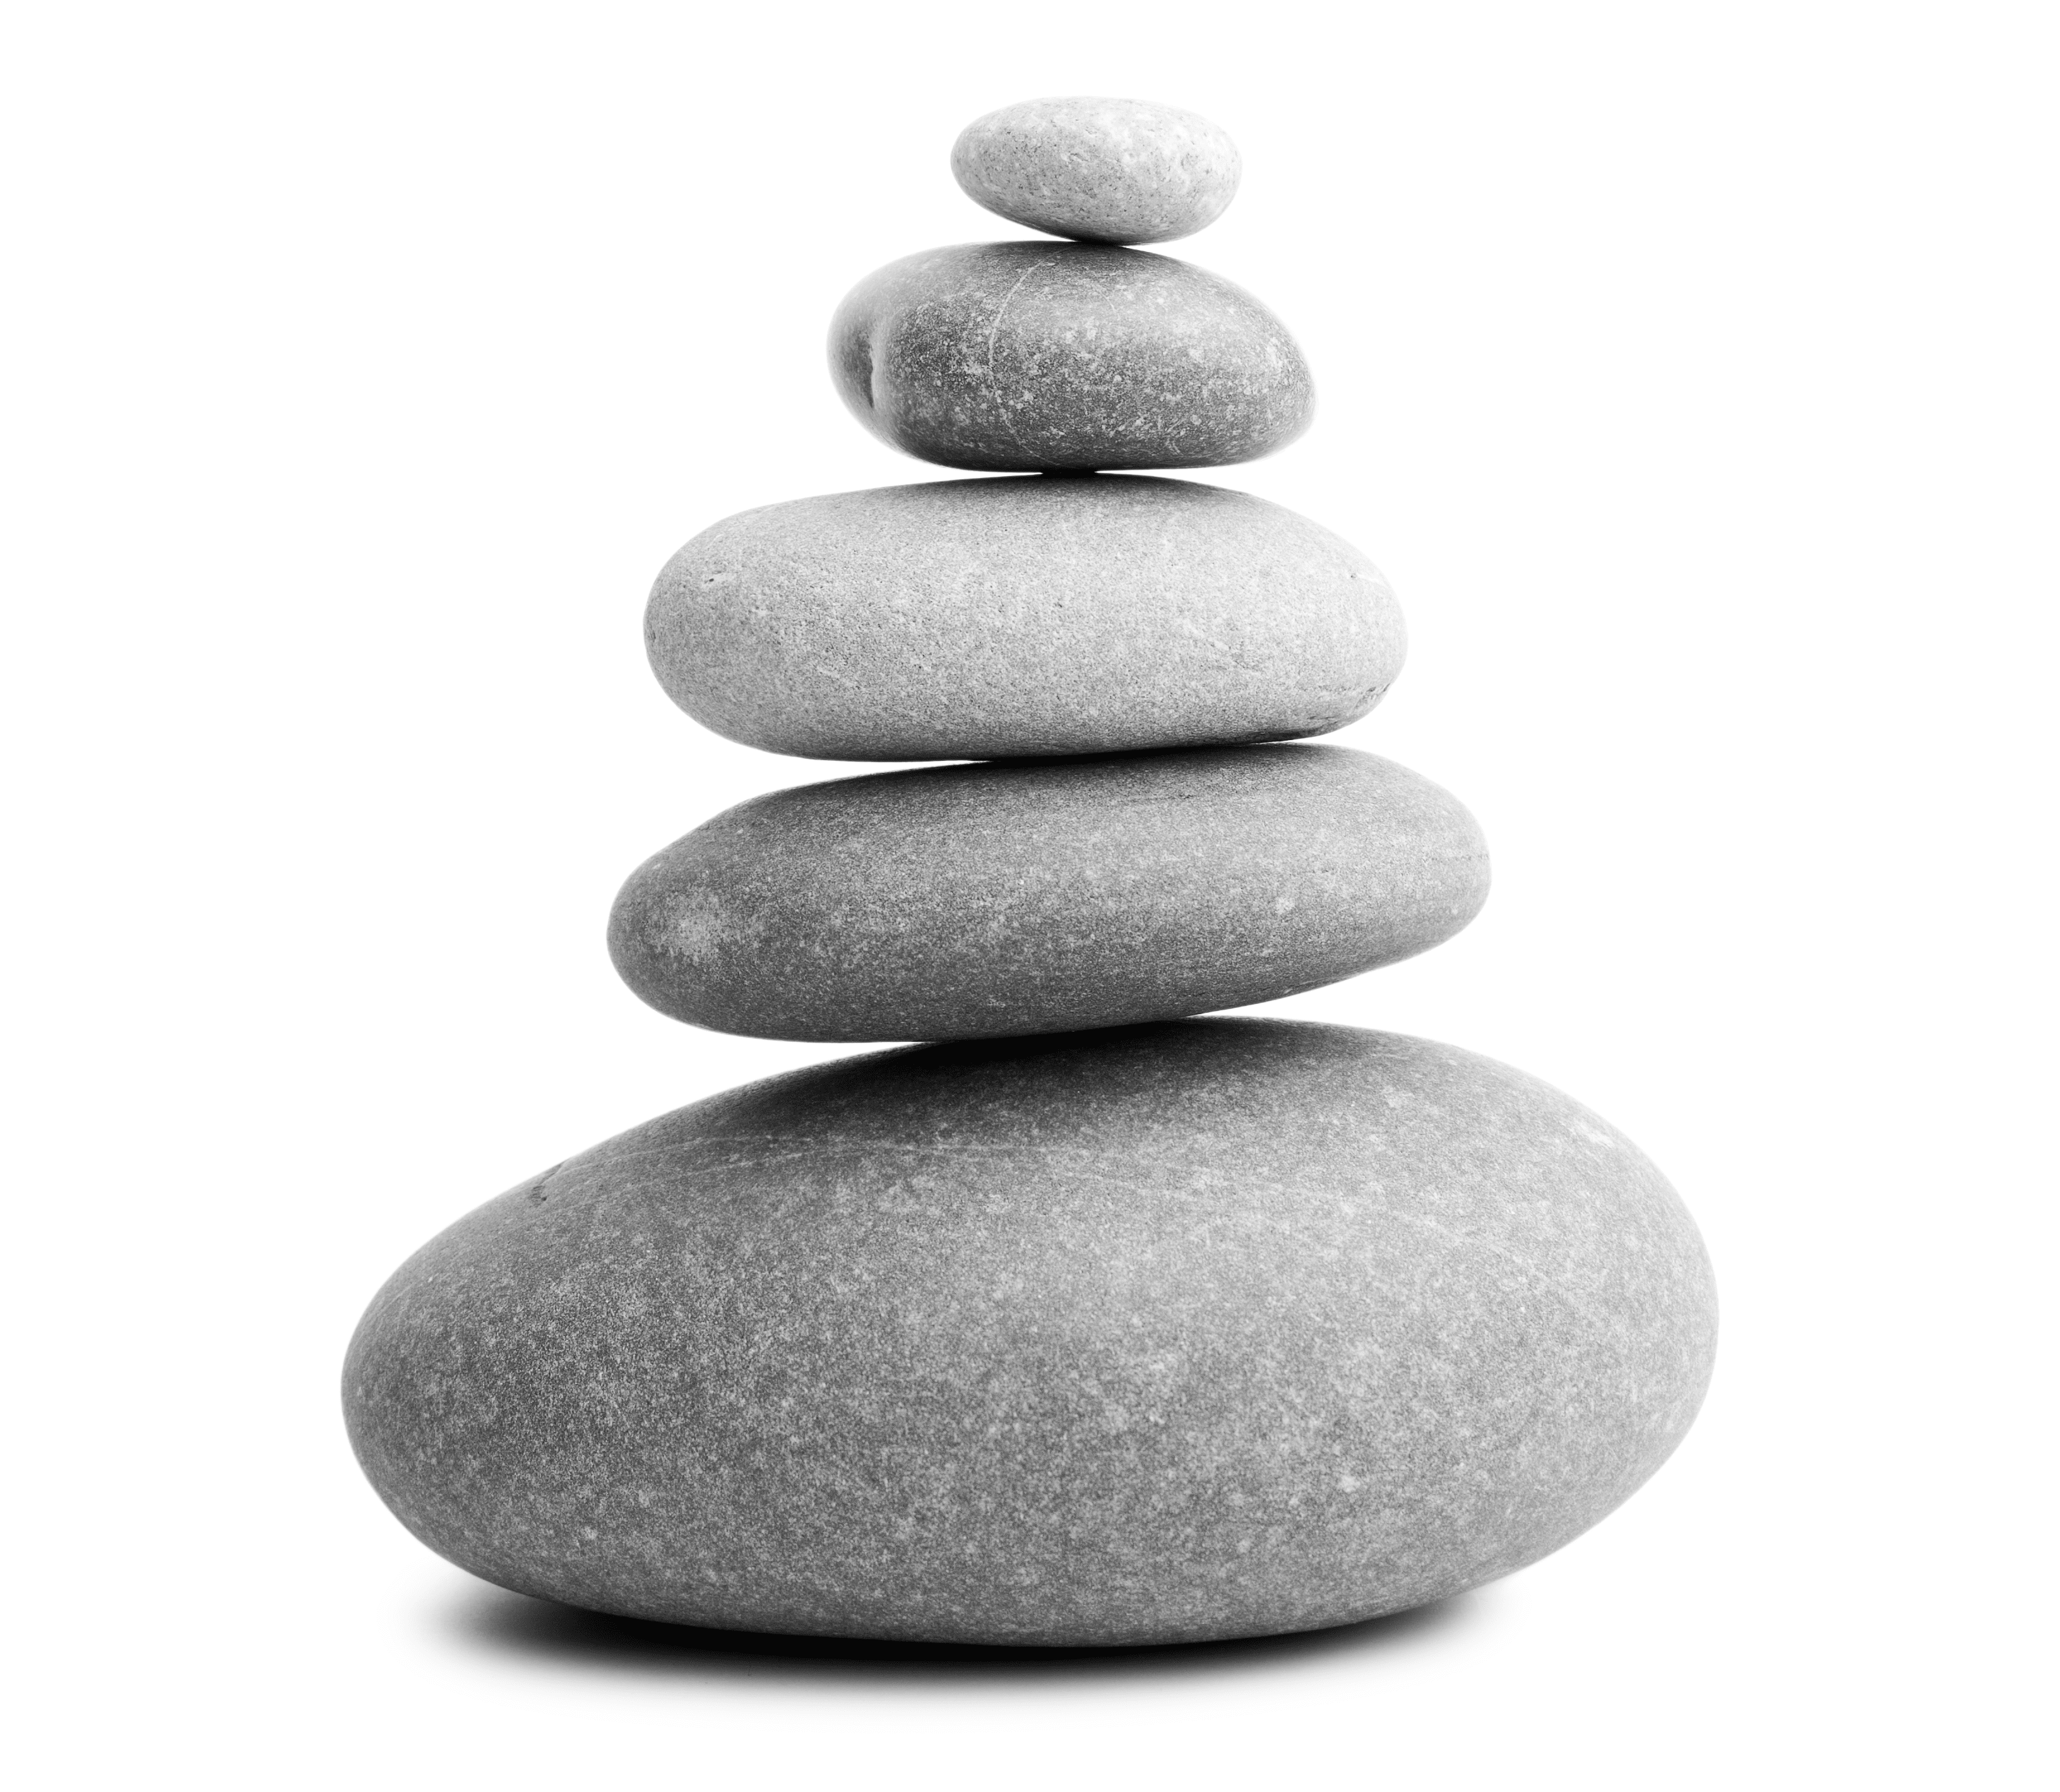 Zen stones piled on top of one another